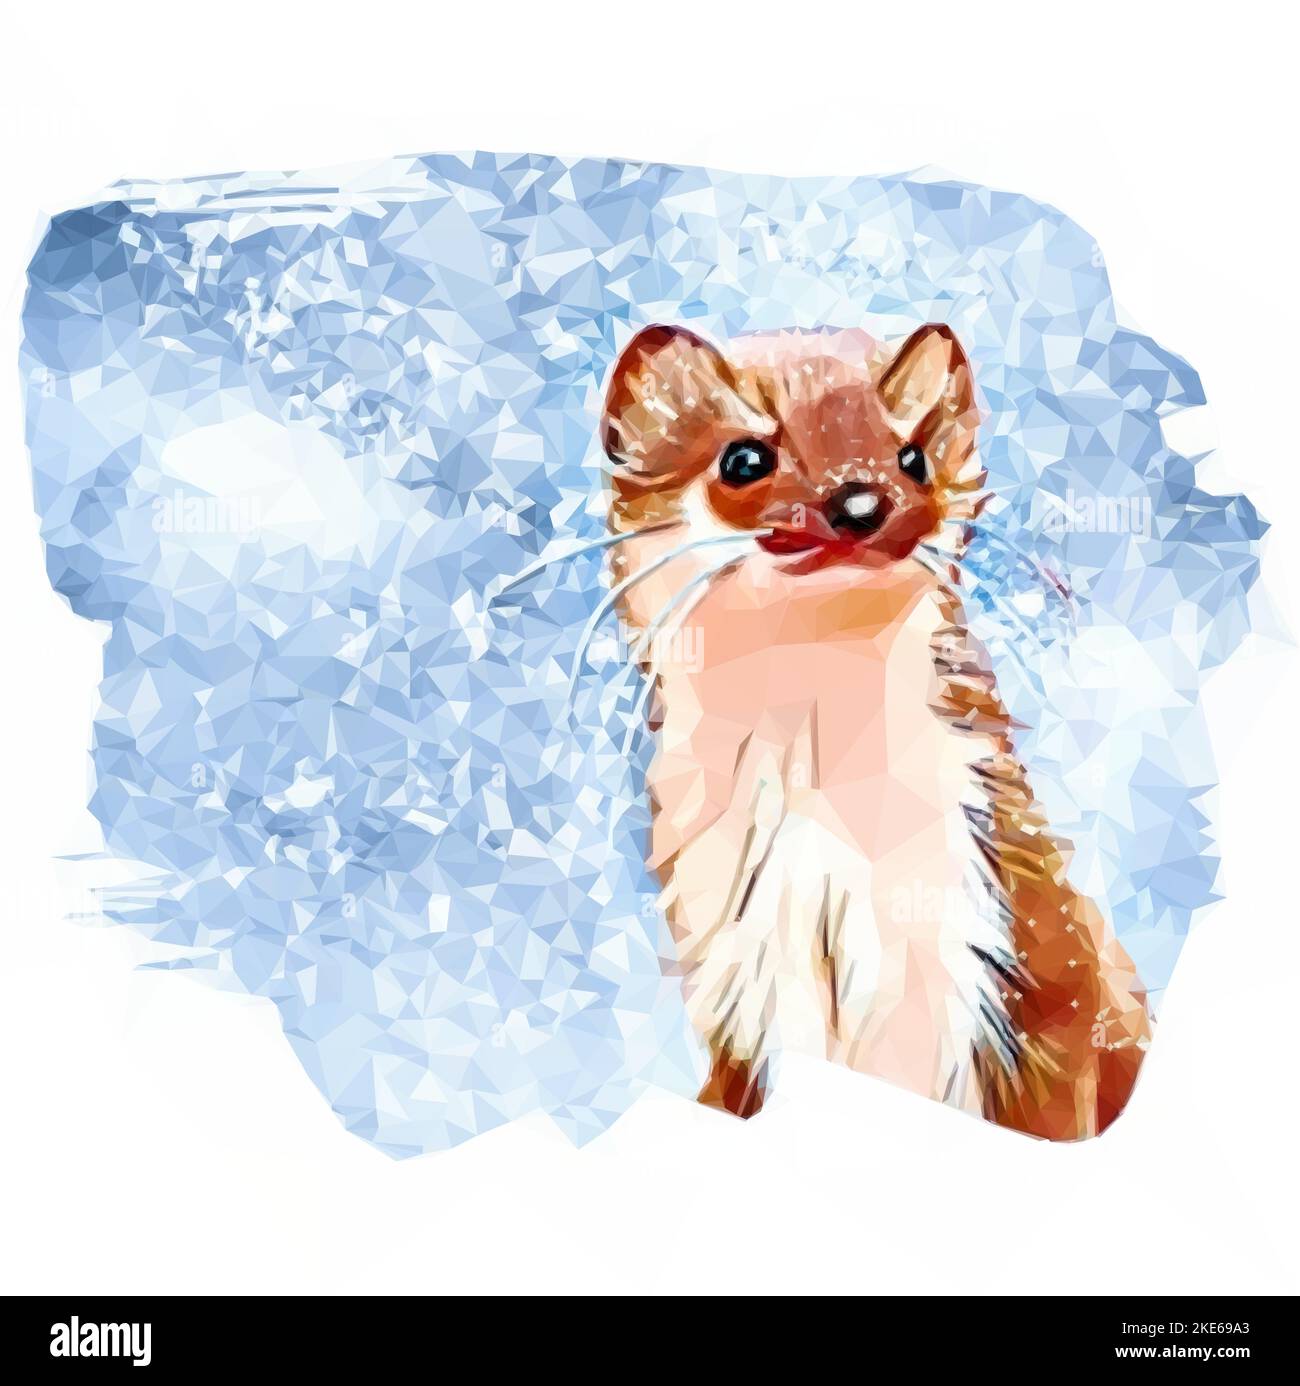 Weasel in the snow. The marten has snowflakes in its fur. Wild animal in winter. Vector in Low Poly Style. Stock Vector